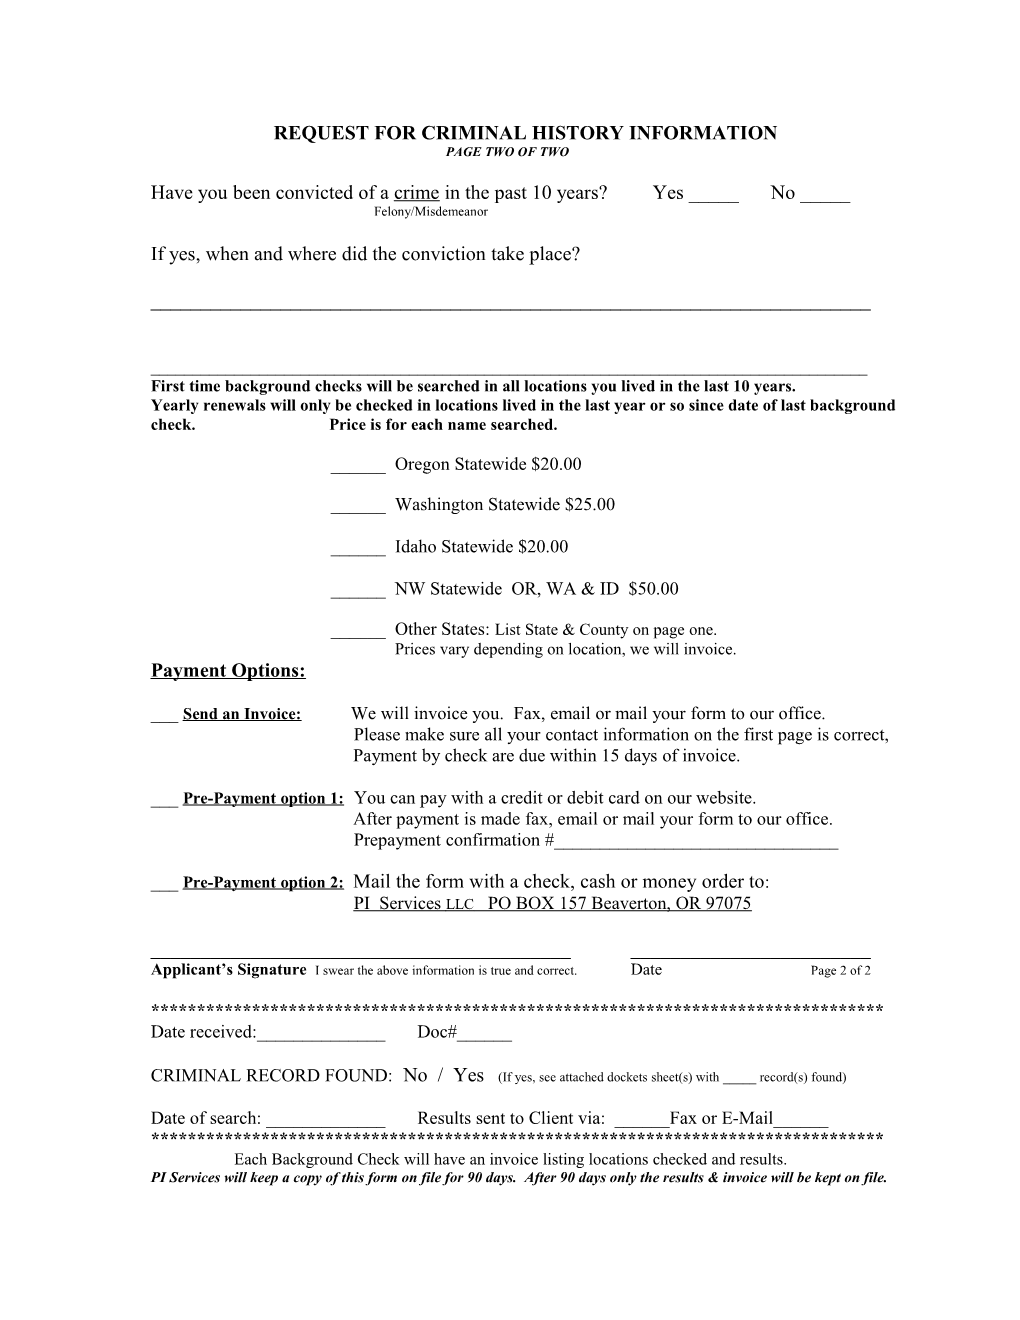 Request for Criminal History Information s1